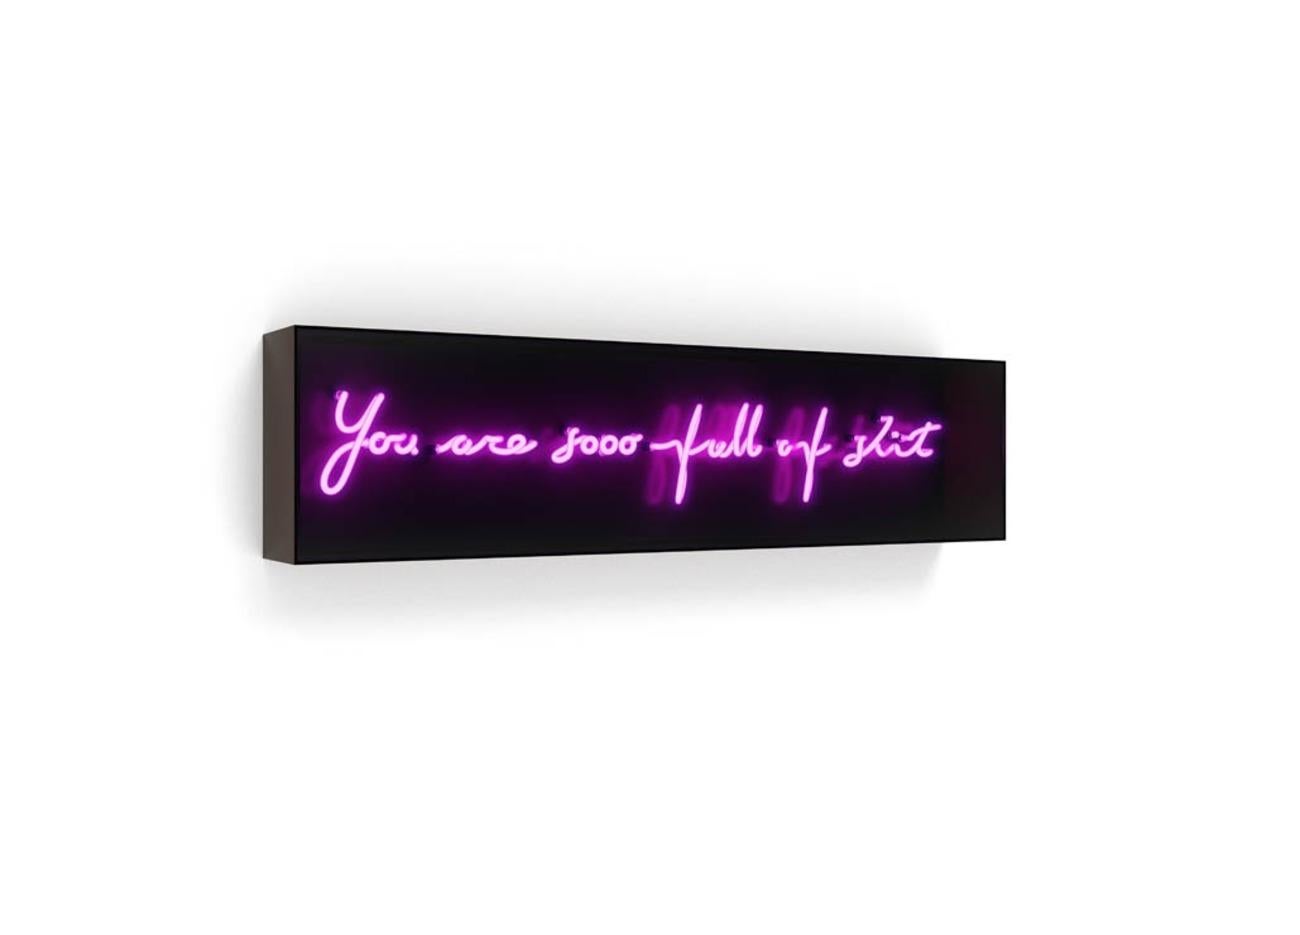 Series: Neon
10" x 60" x 7.5" - Edition of 9

Disarmingly blunt and intensely intimate, David Drebin's neon light installations illuminate hidden aspirations and secret thoughts of the femmes fatales who inhabit the elusive world of his iconic